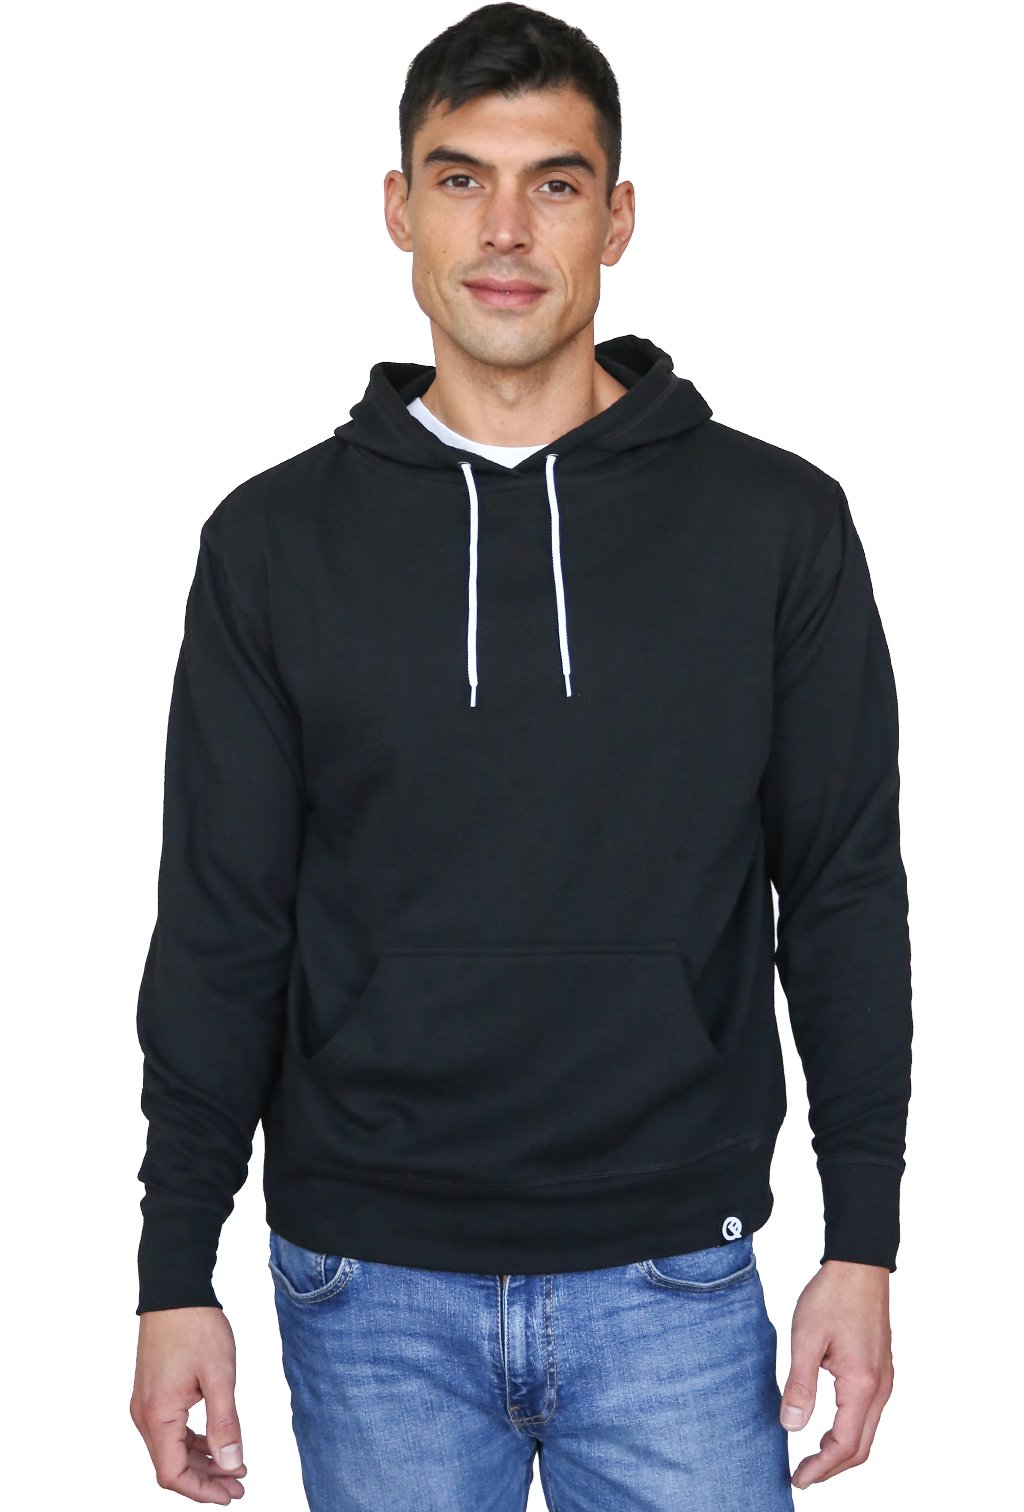 Graphic Trim Zip-Up Hoodie - OBSOLETES DO NOT TOUCH